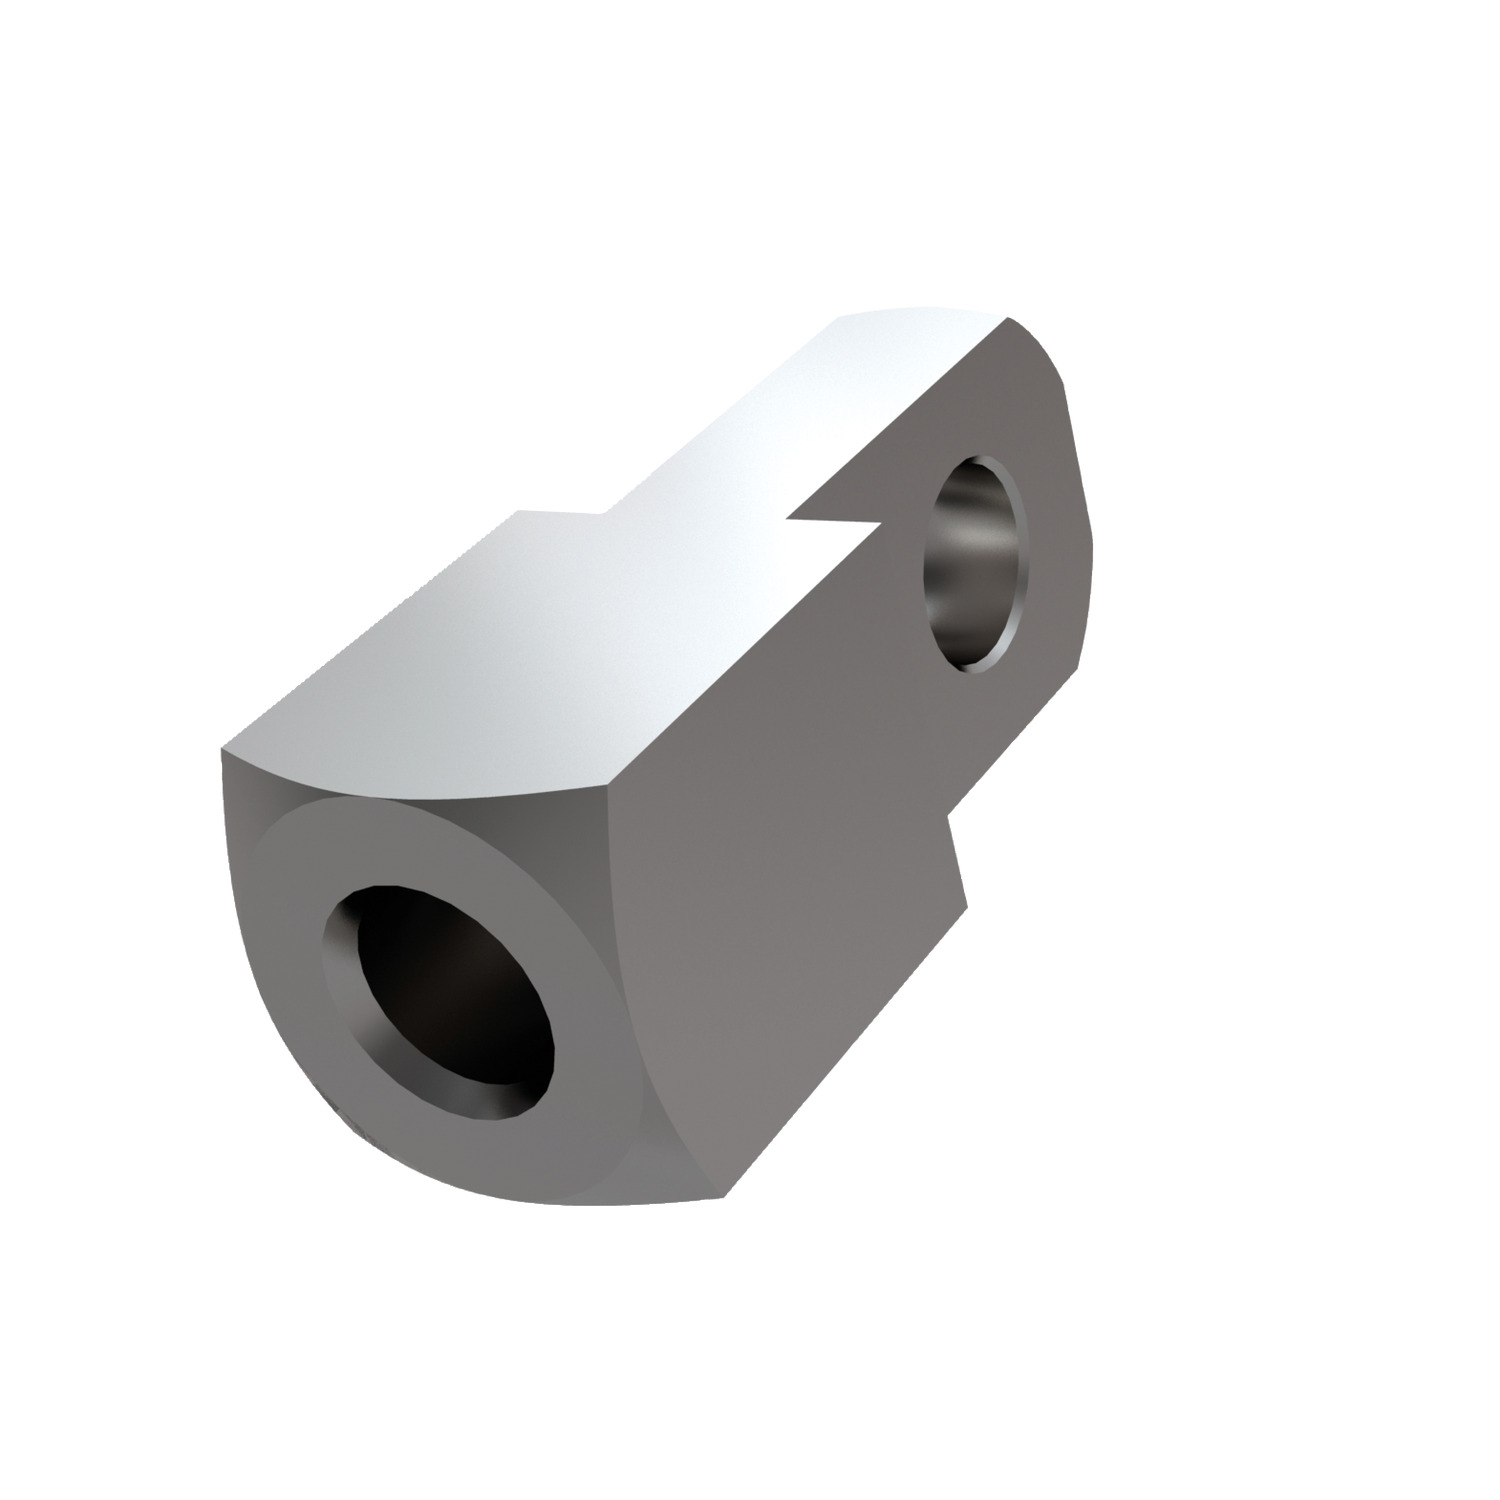 Product 65657, Stainless Mating Piece for Clevis Joints  left hand thread / 